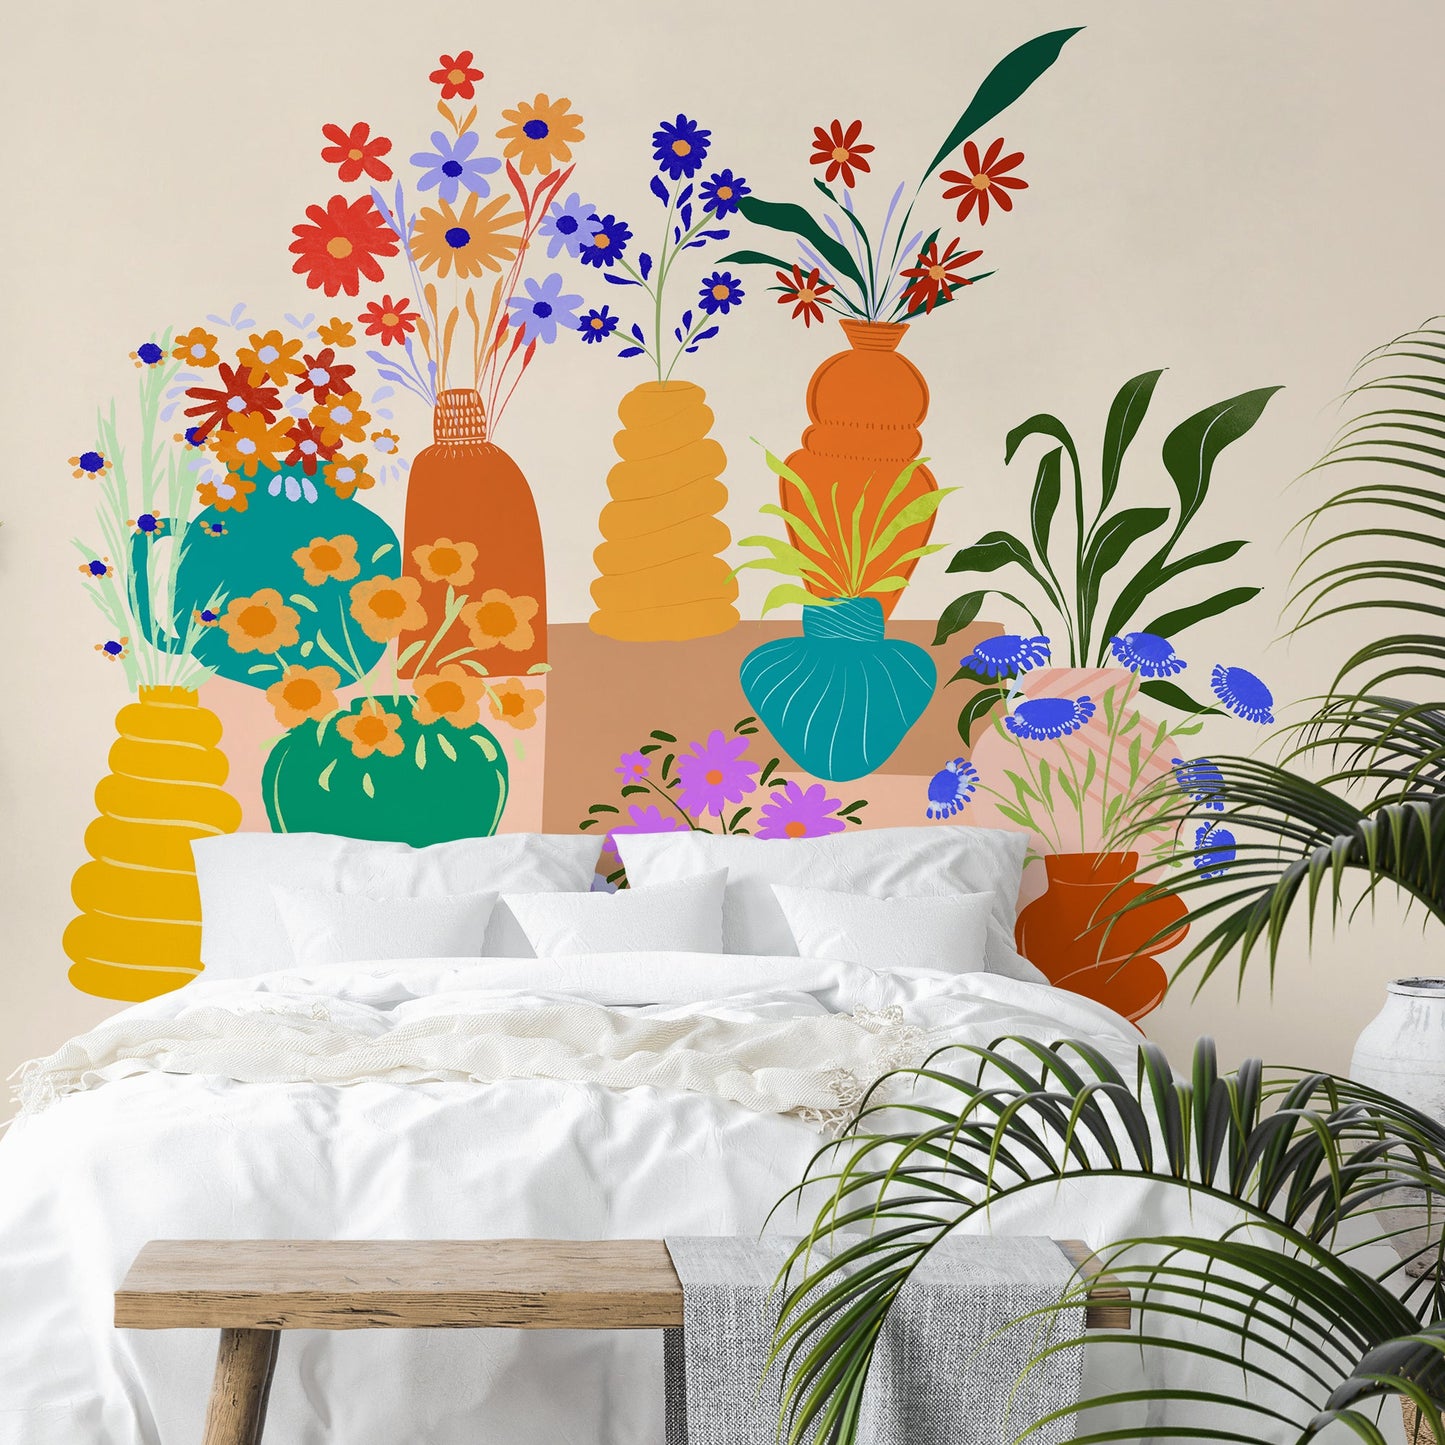 Peel & Stick Wall Mural - My Colourful Vases By Lunette by Parul